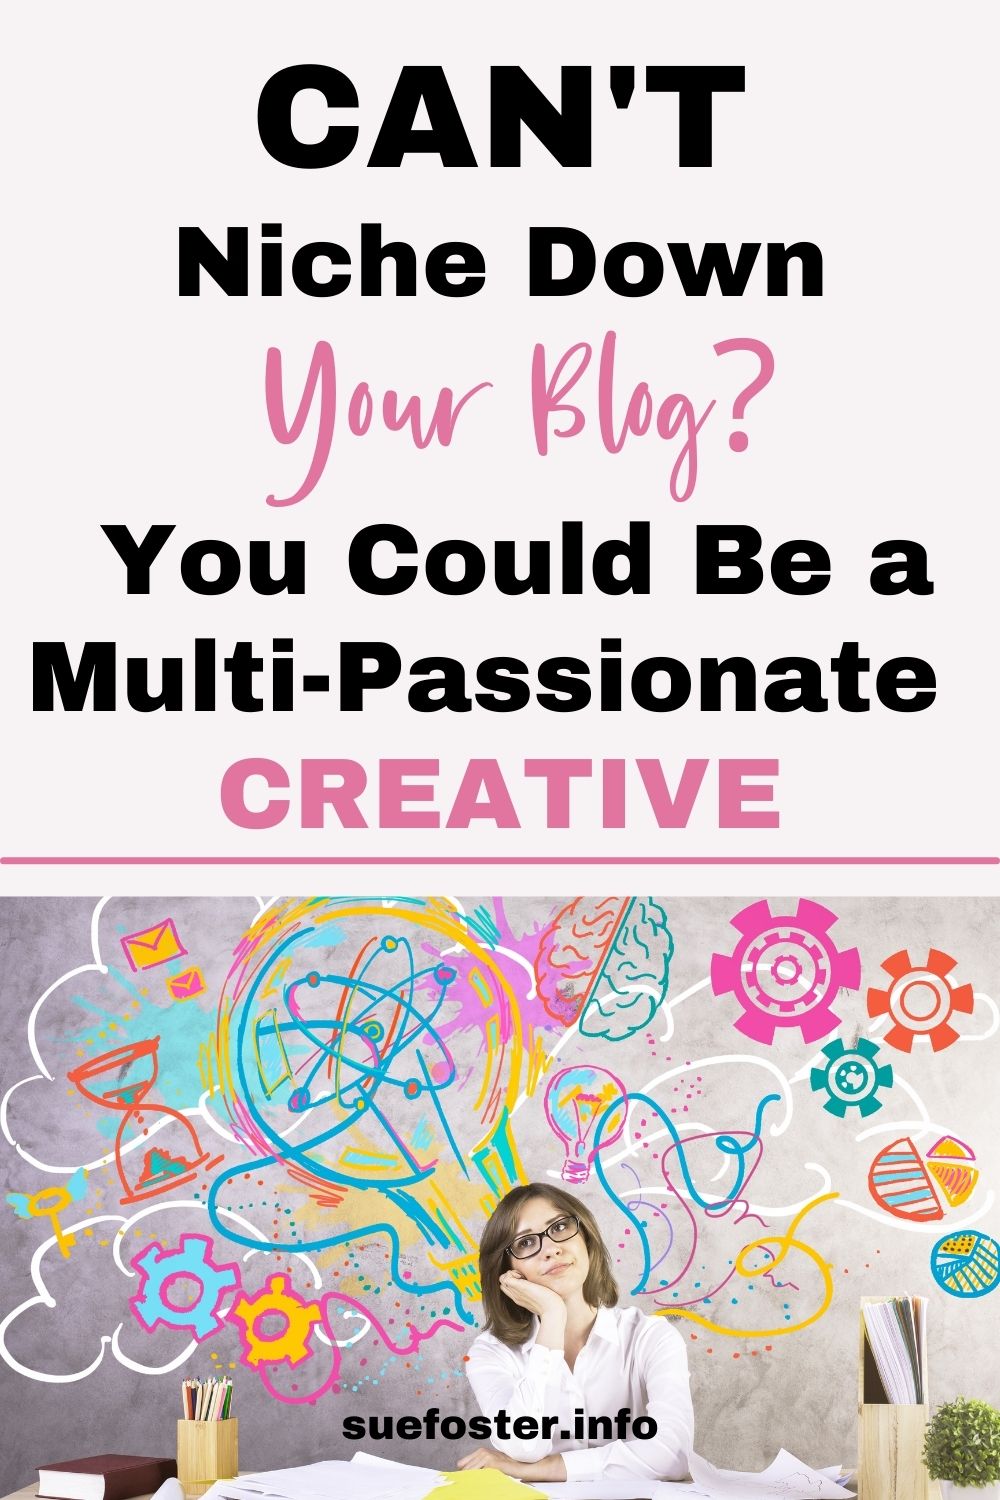 Niche-specific blogs are a great way to build a following and to stand out from the crowd. But what if you can't niche down?